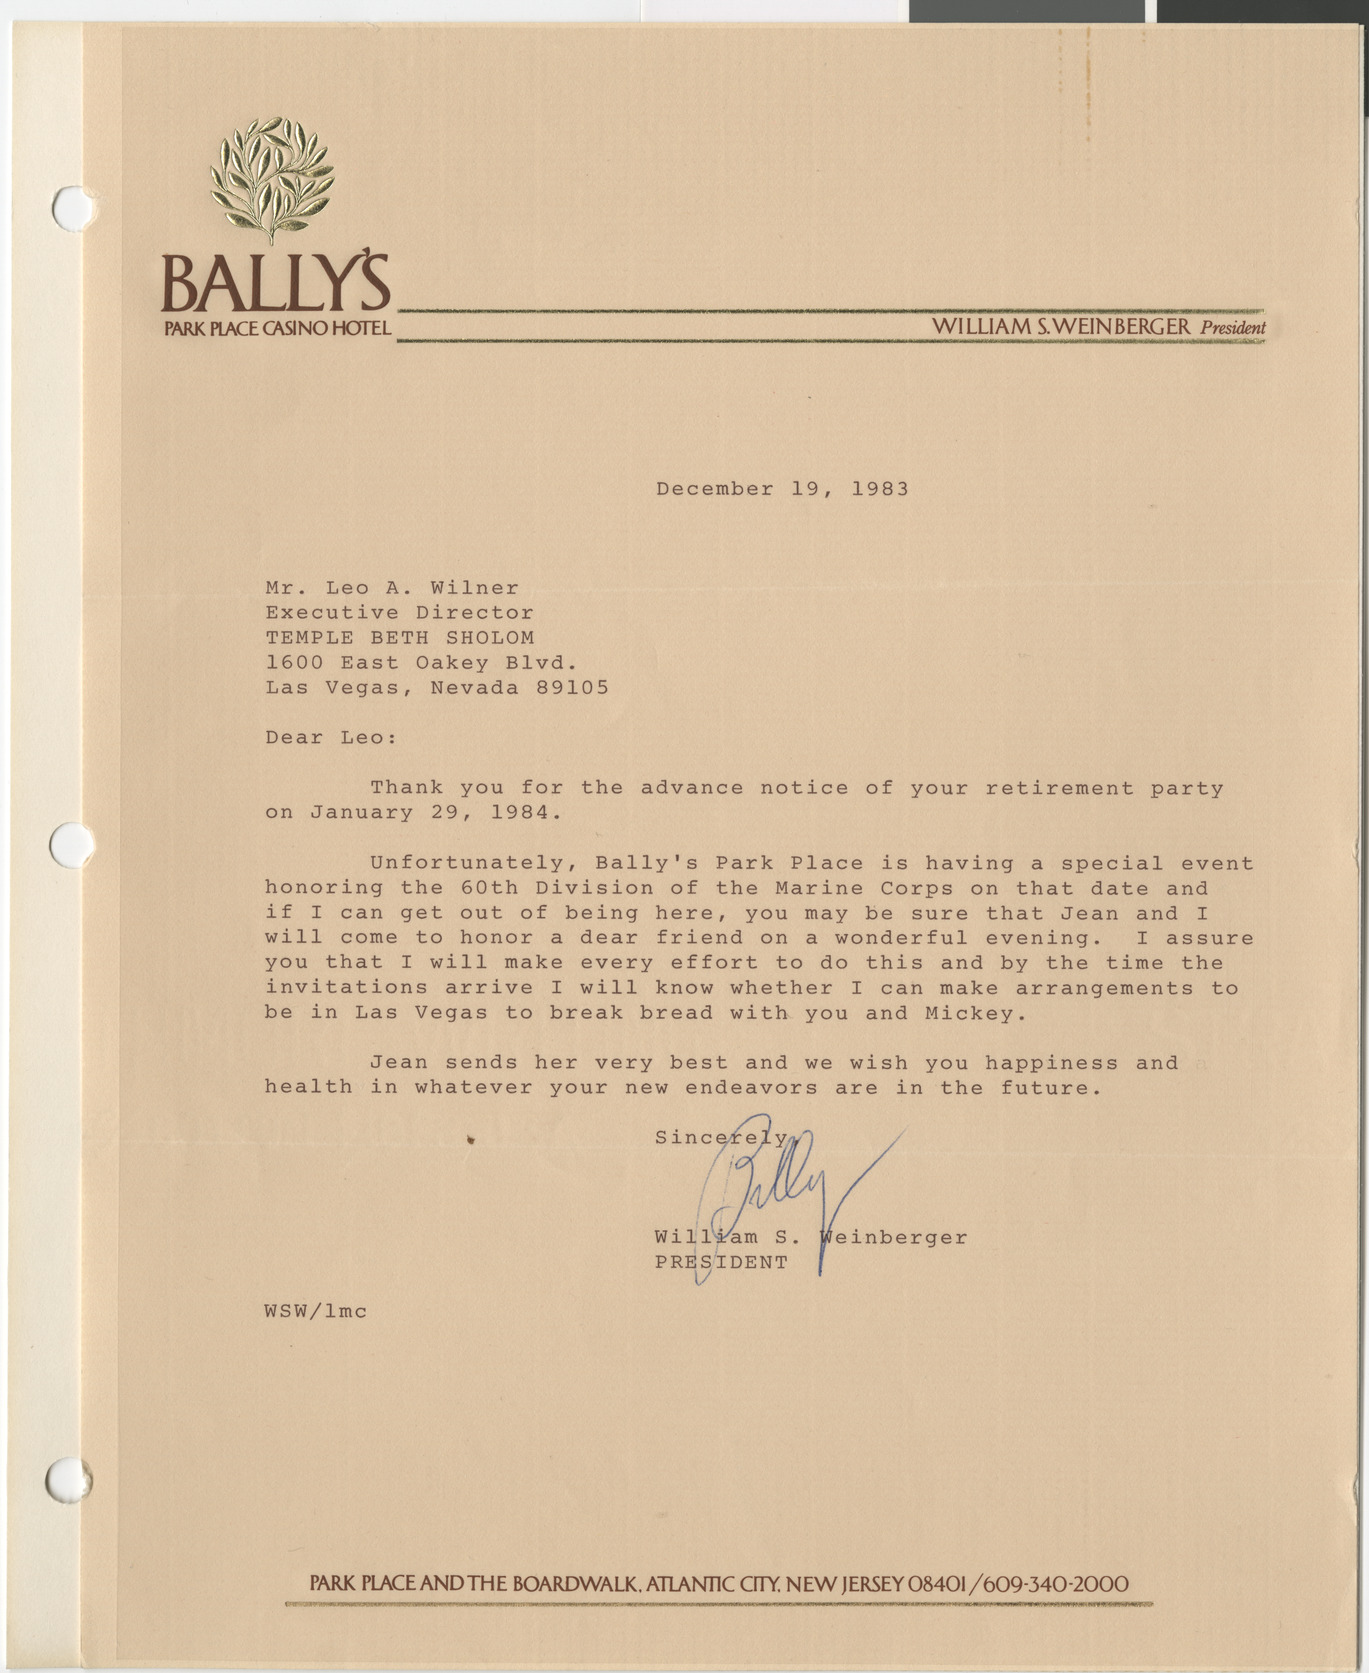 Letter from William S. Weinberger (Bally's Hotel) to Leo Wilner, December 19, 1983